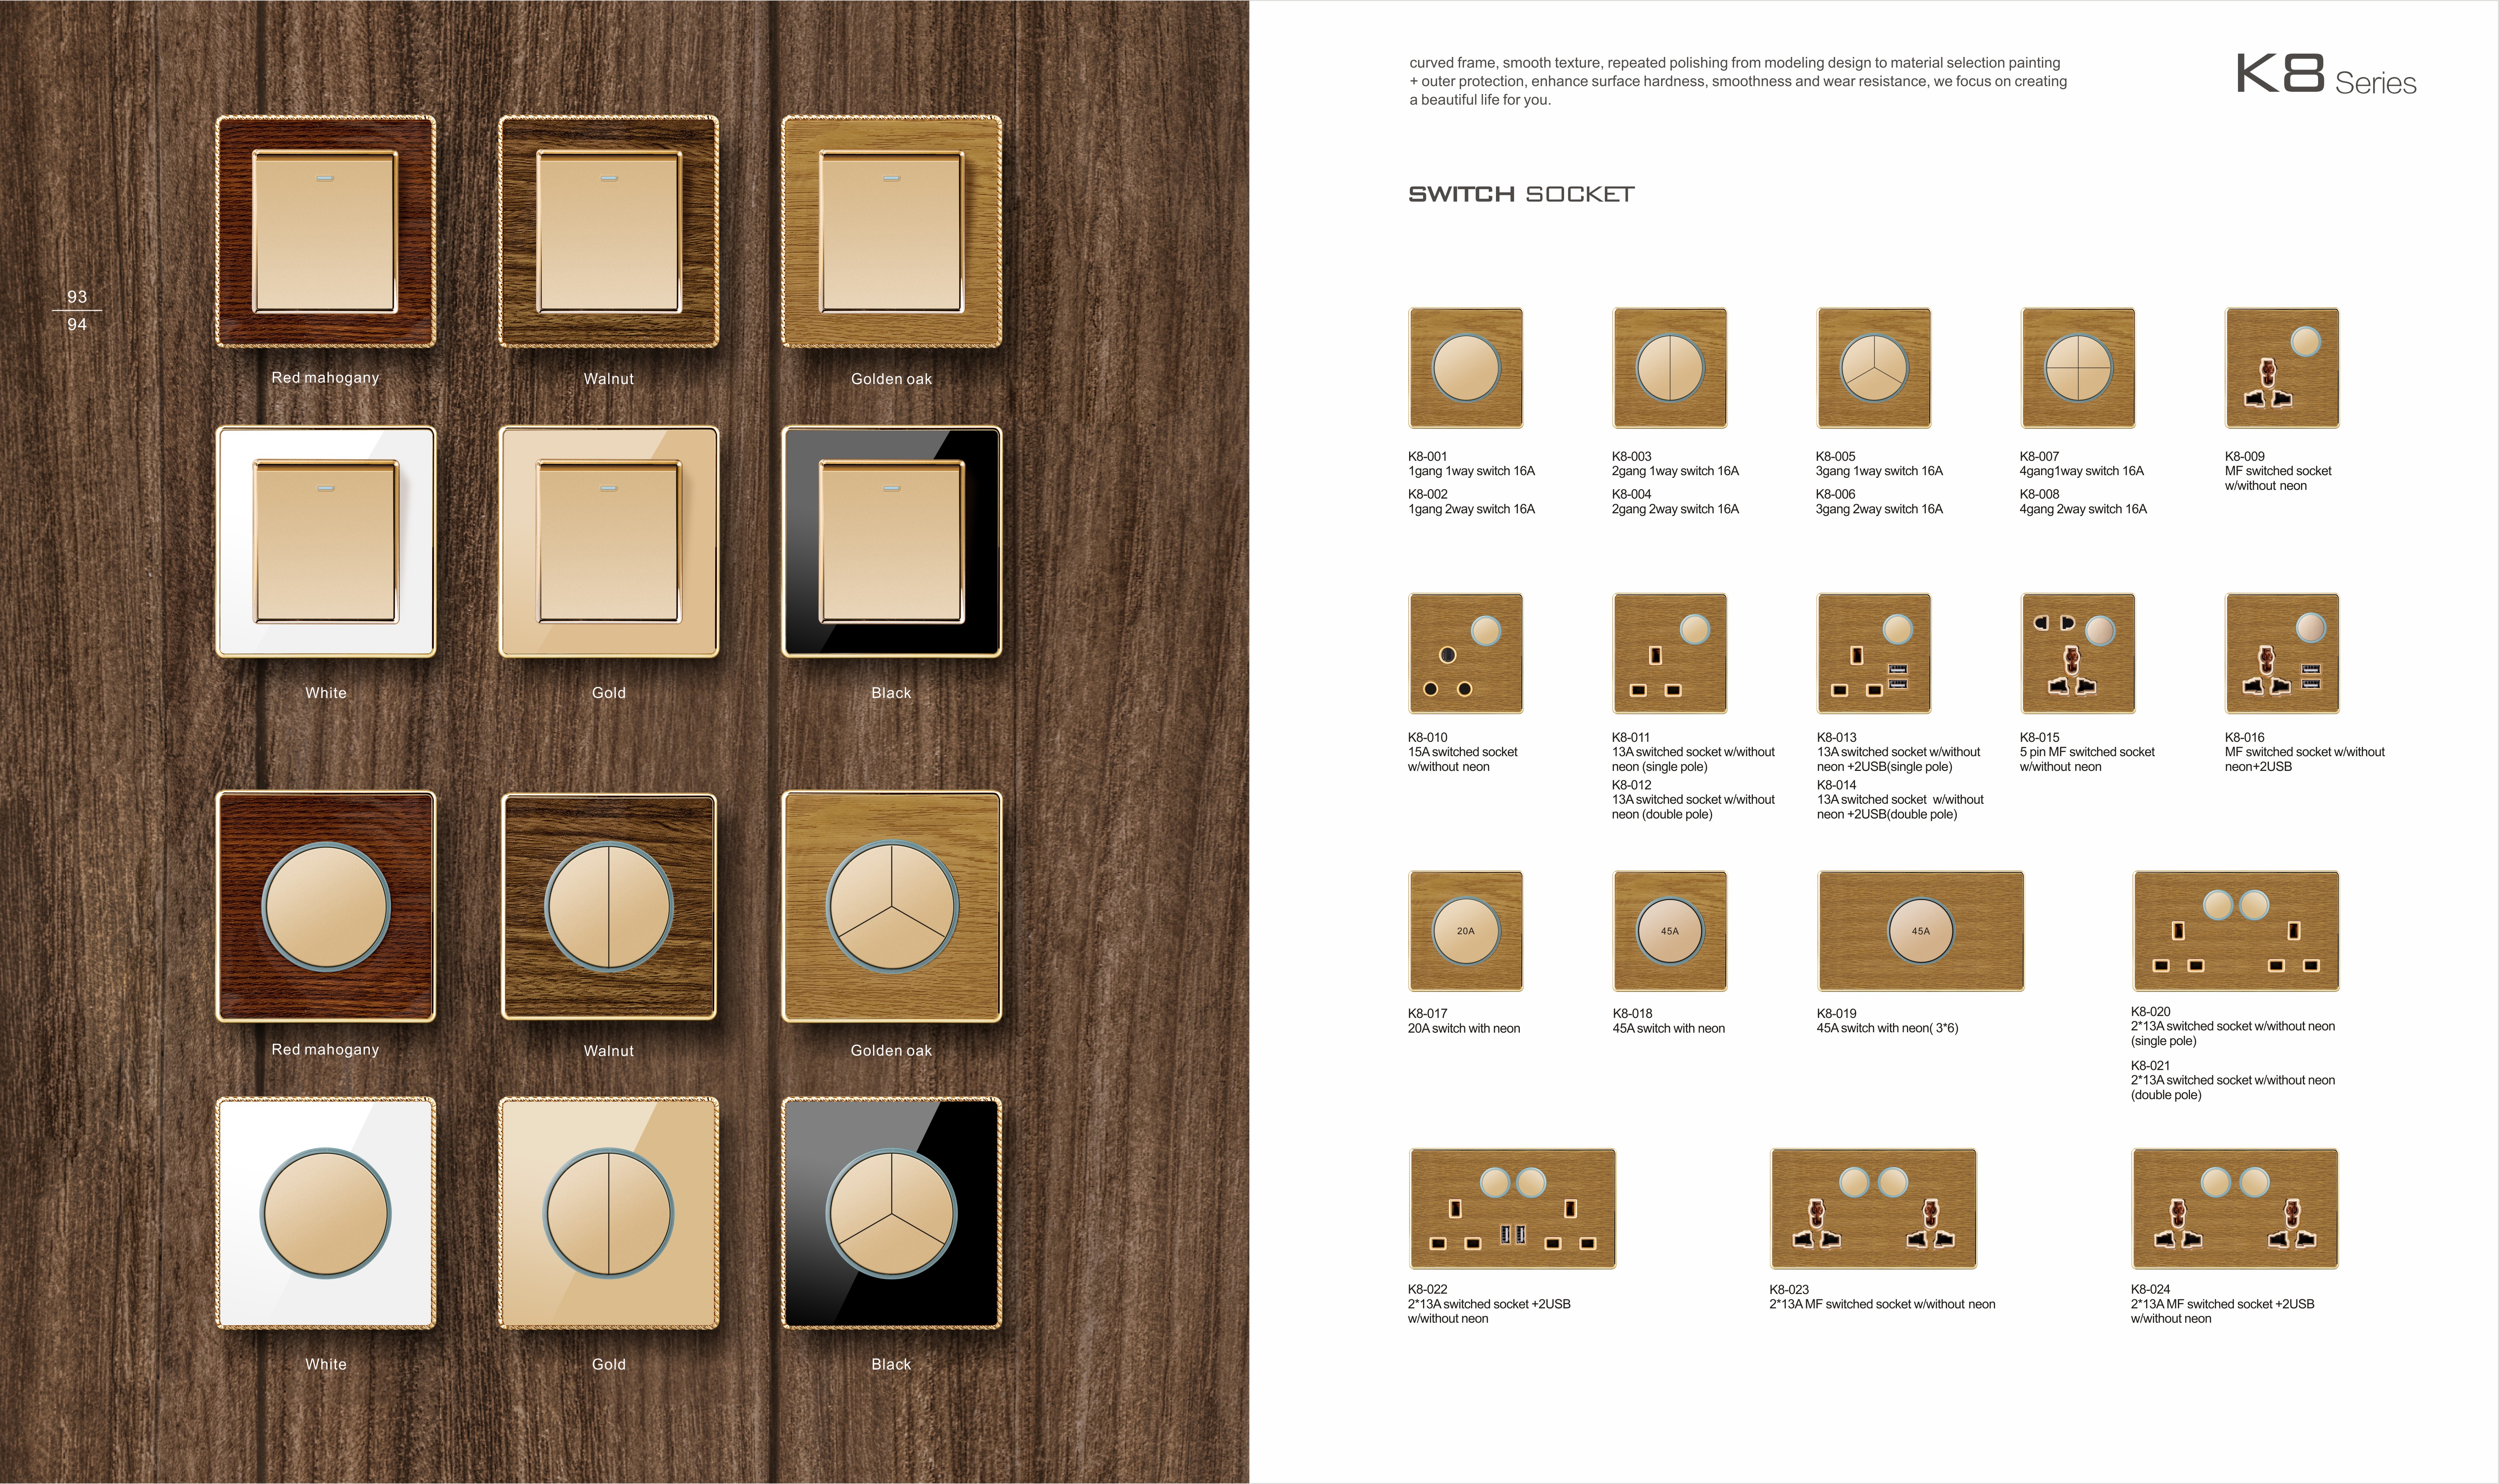 K8 Series Acrylic Wooden 2G 16A 250V Light Electric Wall Switch Socket 86*86cm PC Material with Chrome Frame Home Switches Twist Pattern